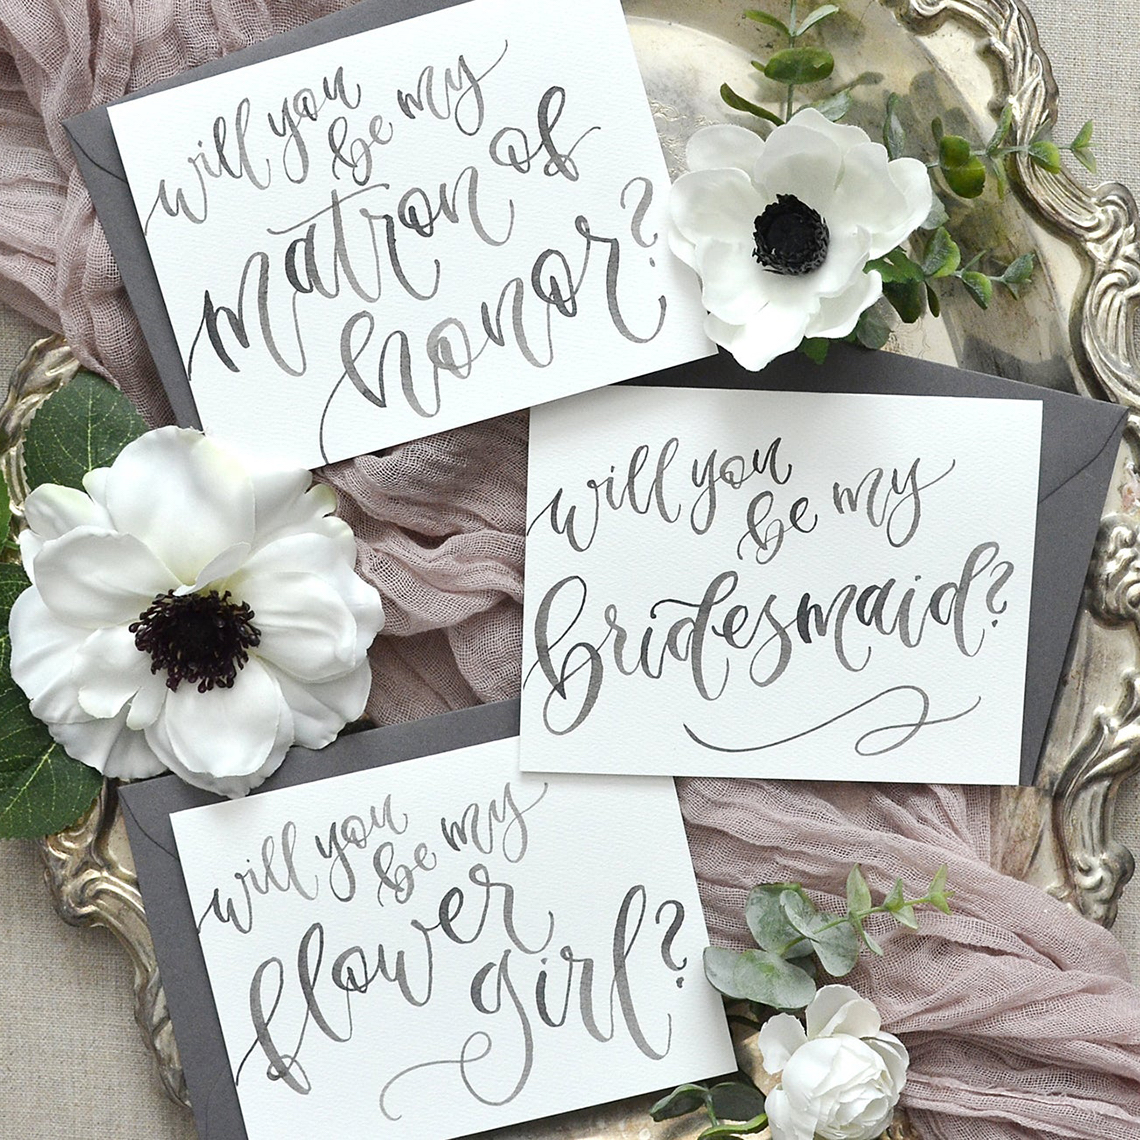 The Best Will You Be My Bridesmaid Cards Bridal Musings 21 - 20 tấm thiệp "Will You Be My Bridesmaid" hay nhất